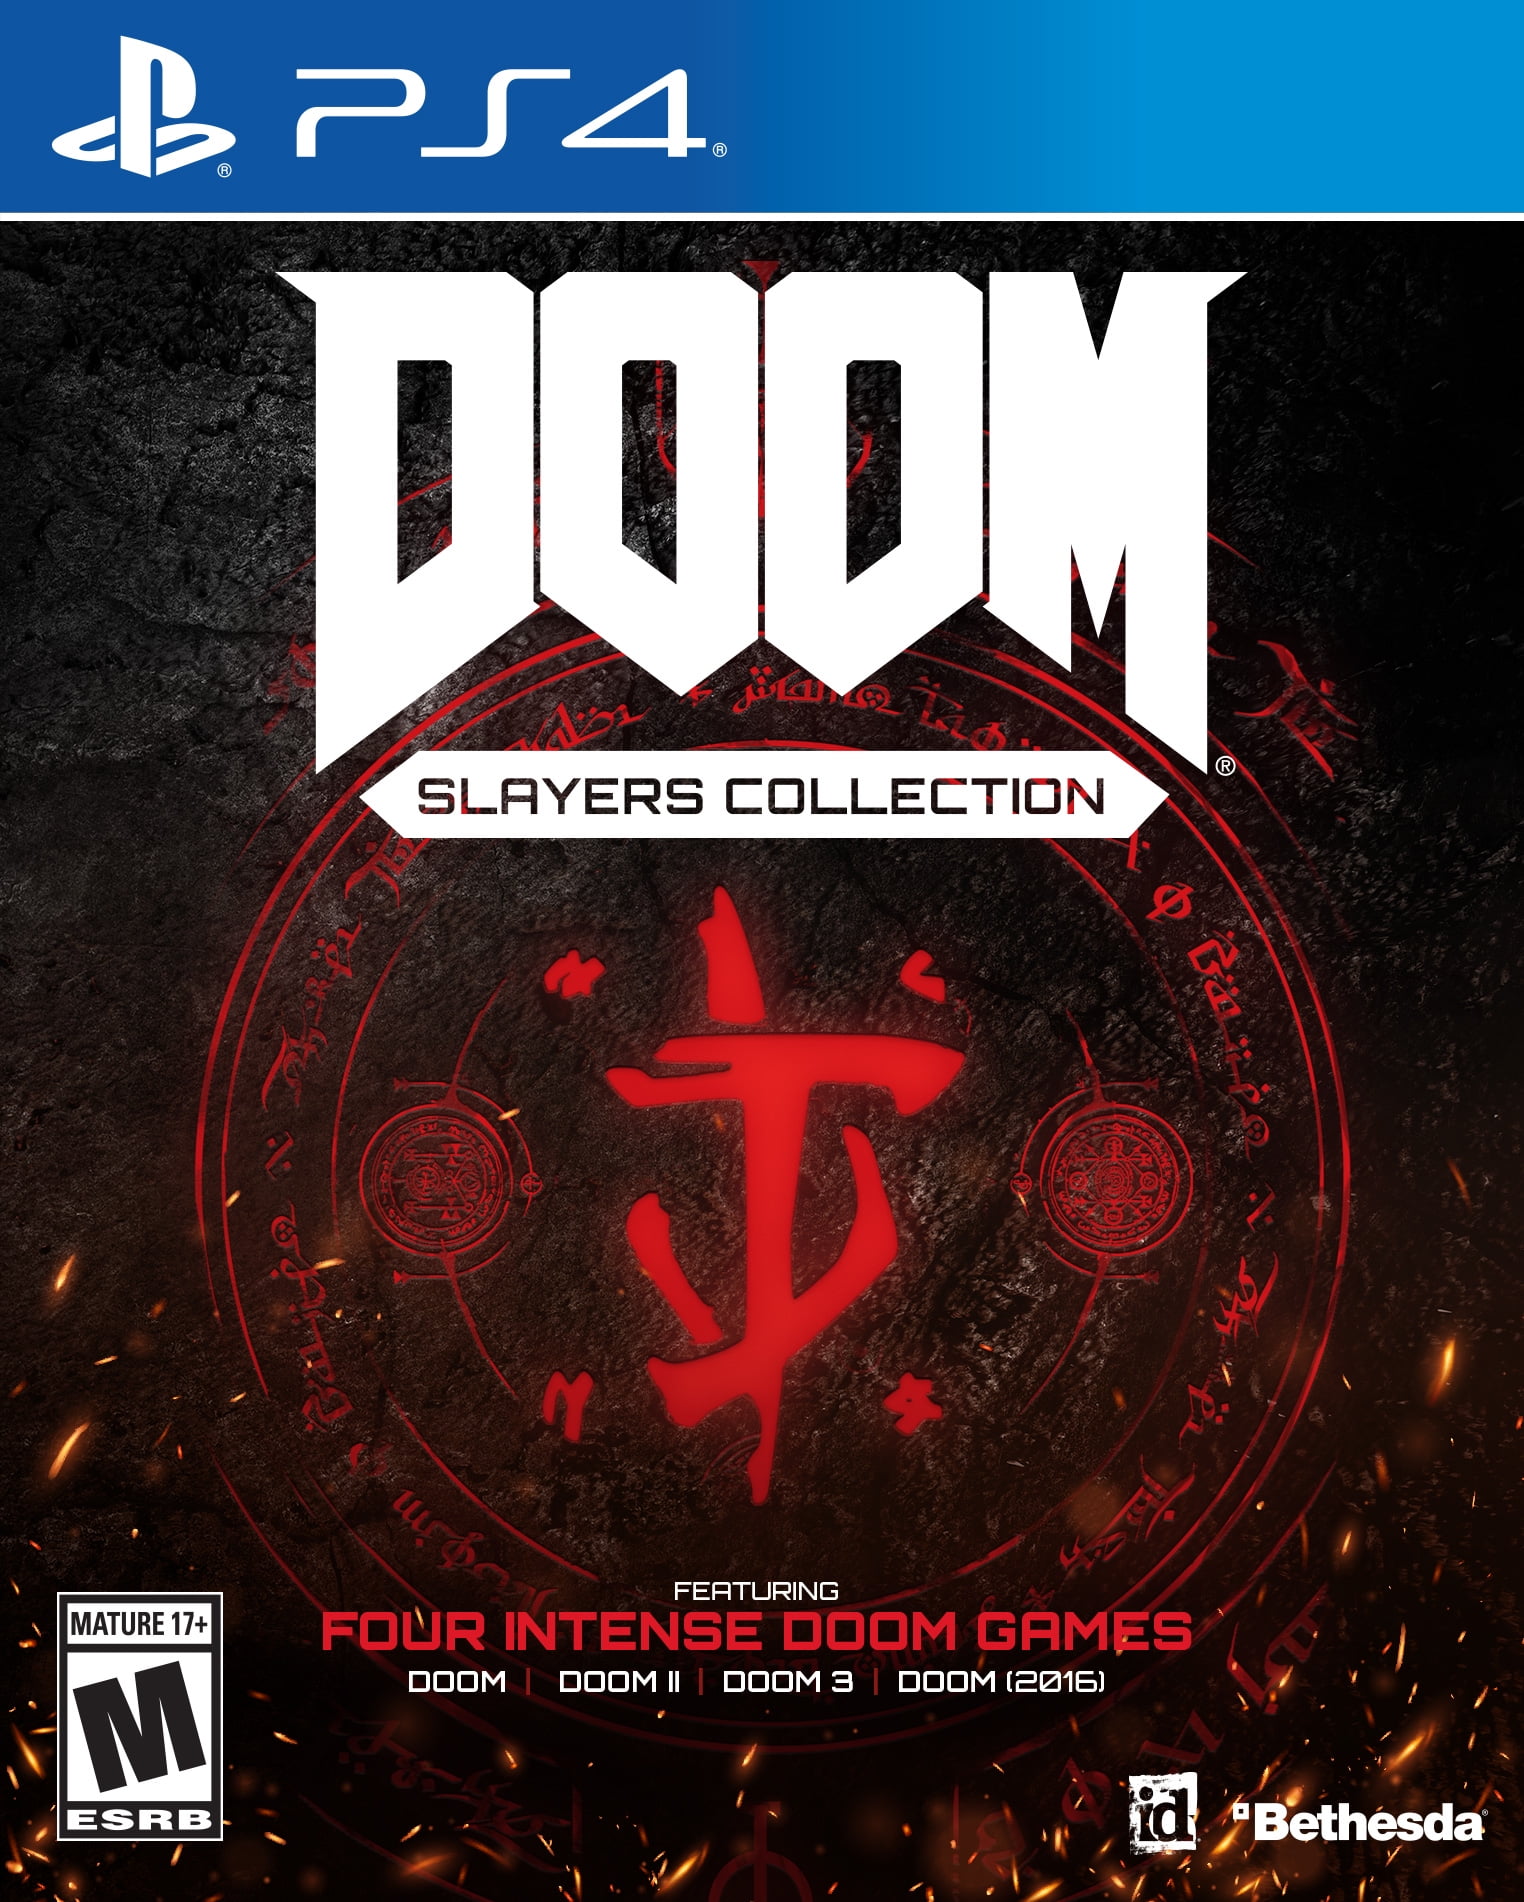 Doom collection. Doom Slayers collection ps4 диск. Игра Doom Slayers collection. Doom на пс4. Игра для ps4 "Doom" Slayers collection.